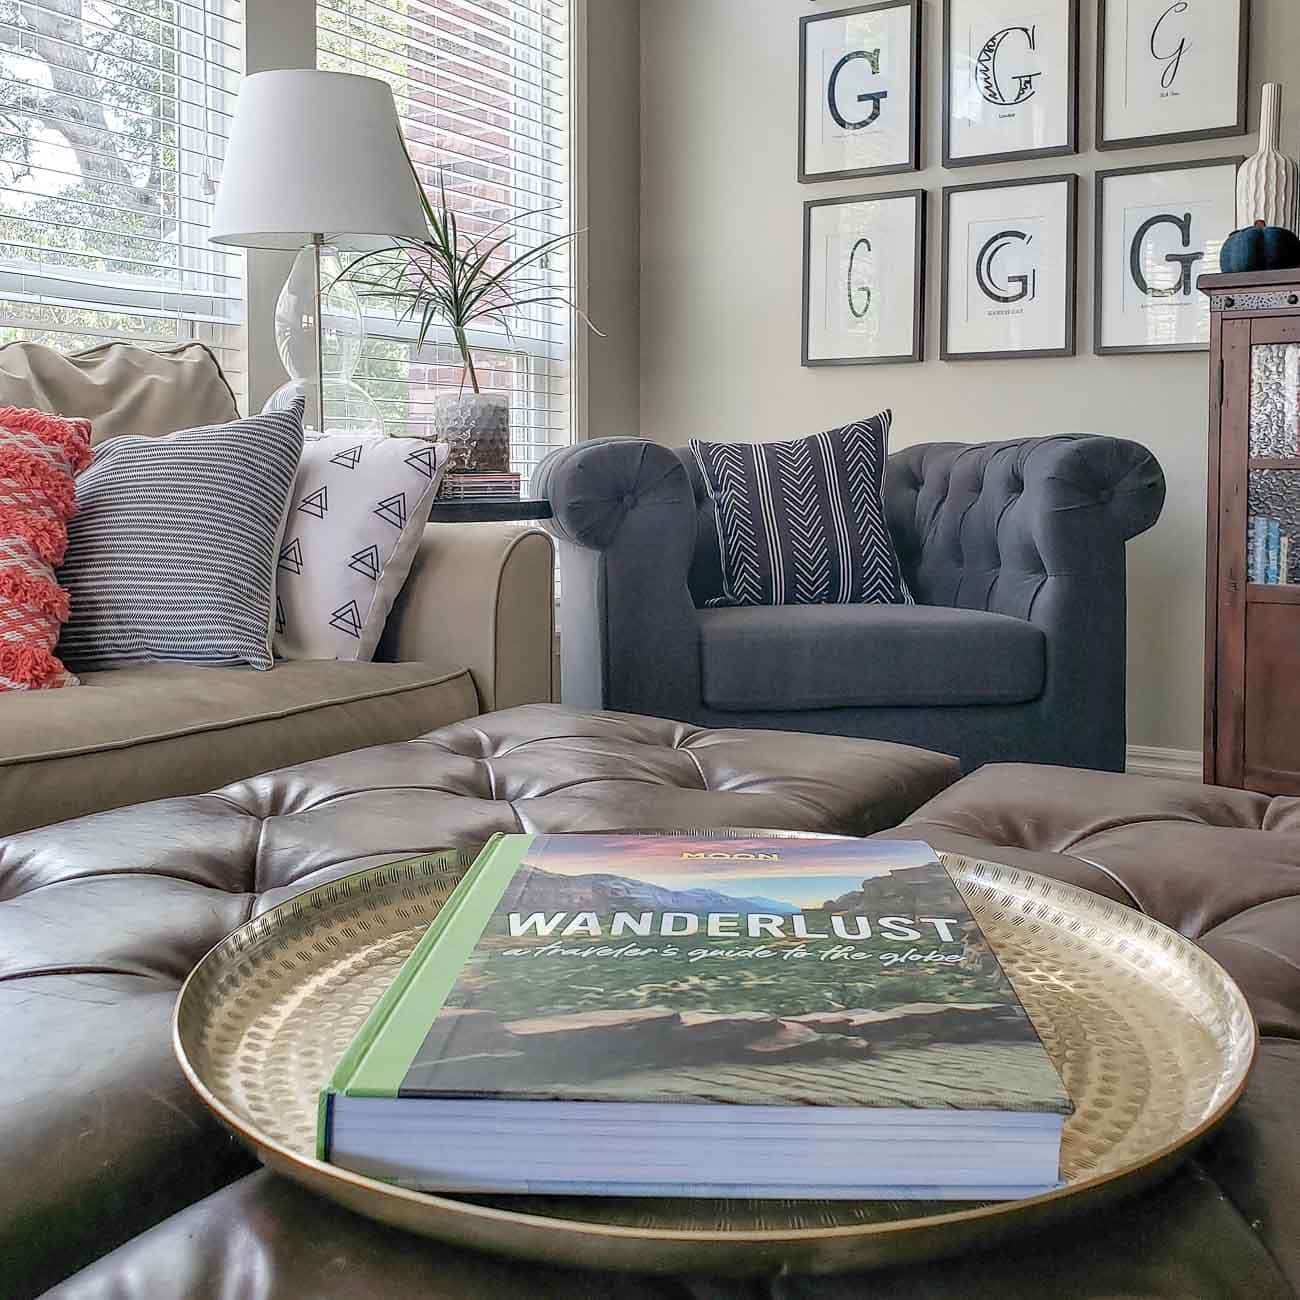 Coffee Table Books - Best Coffee Table Books